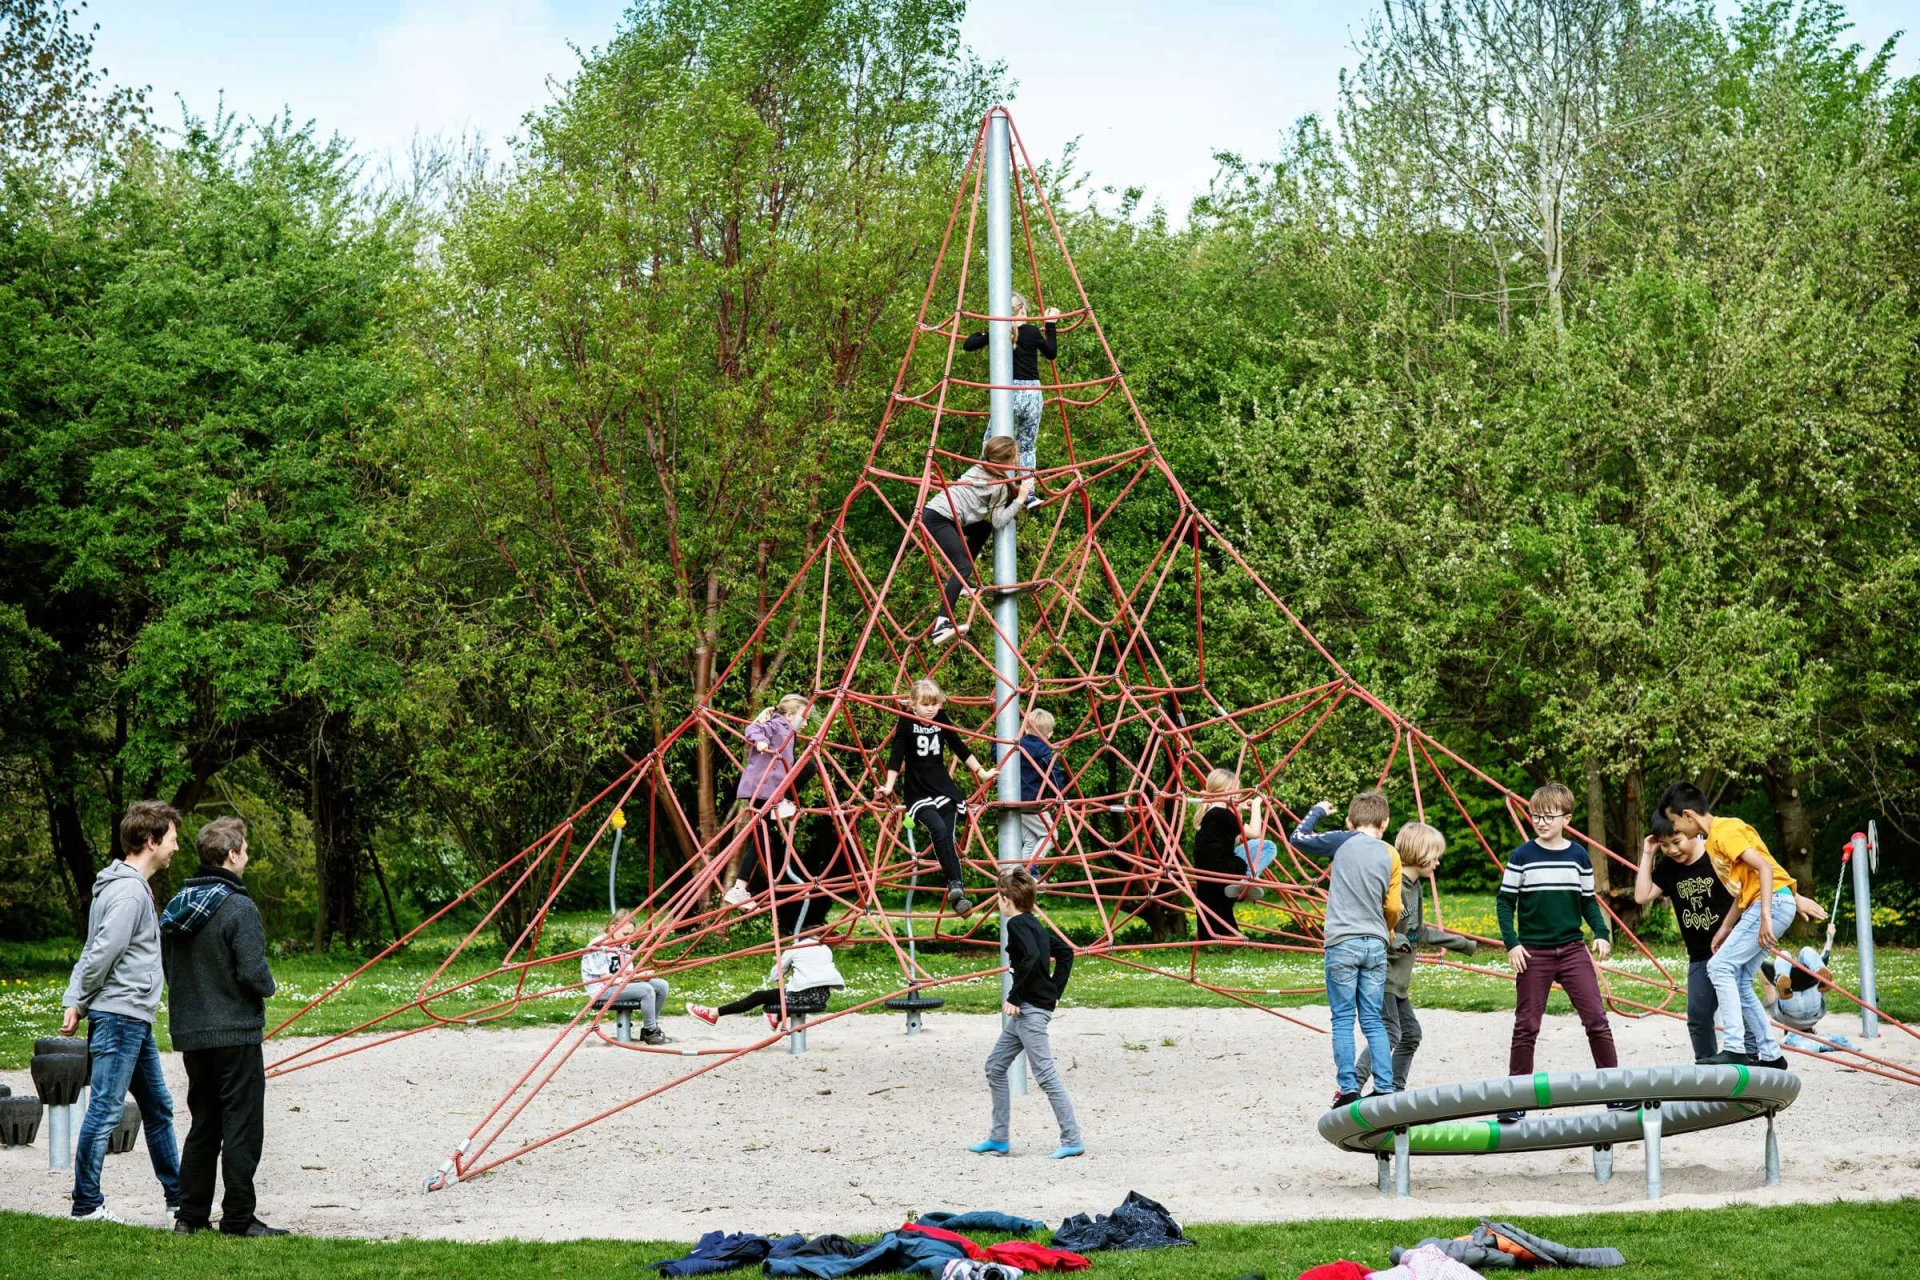 a group of people playing on a pyramid shaped climber structure on a playground